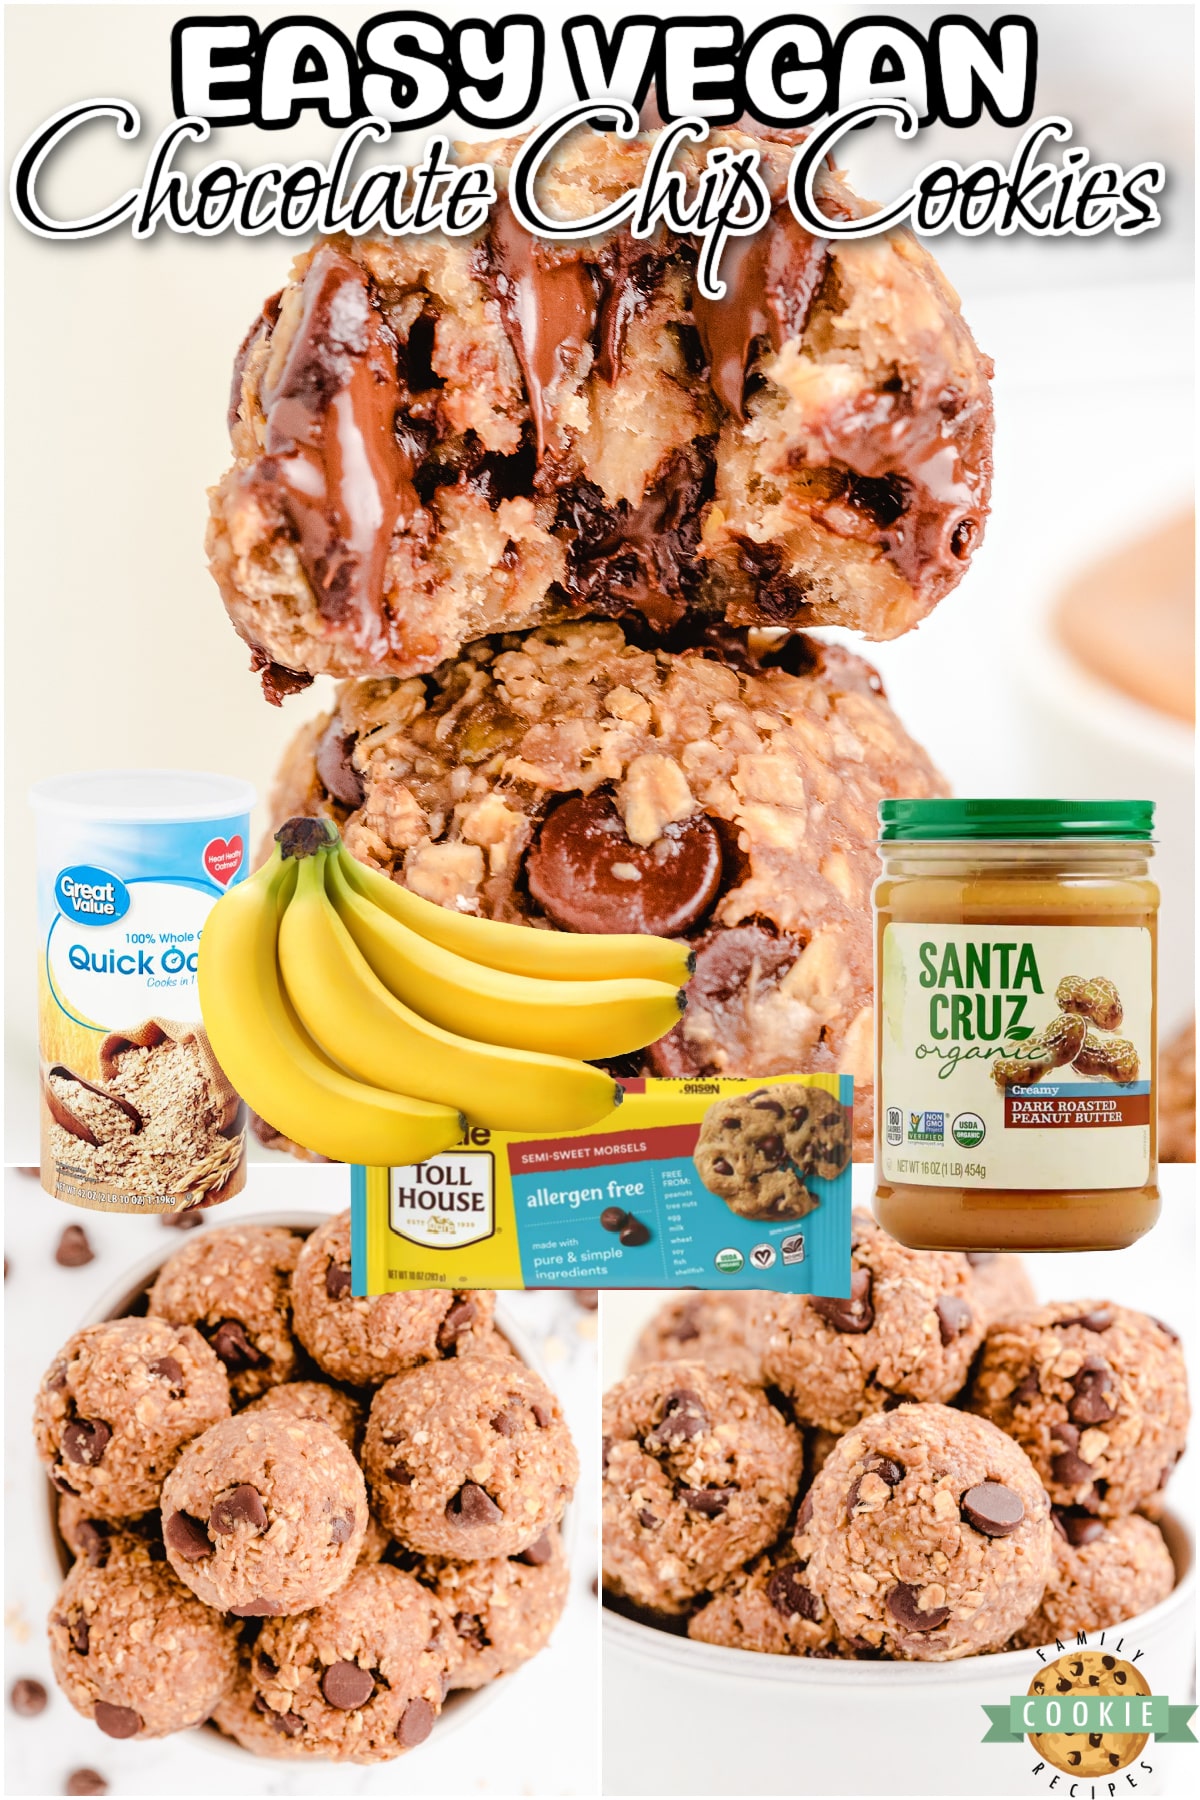 Simple 4 ingredient recipe for Vegan Chocolate Chip Cookies that's made with bananas, oats, peanut butter & chocolate chips! Healthy no bake cookies that you can feel good about eating! 